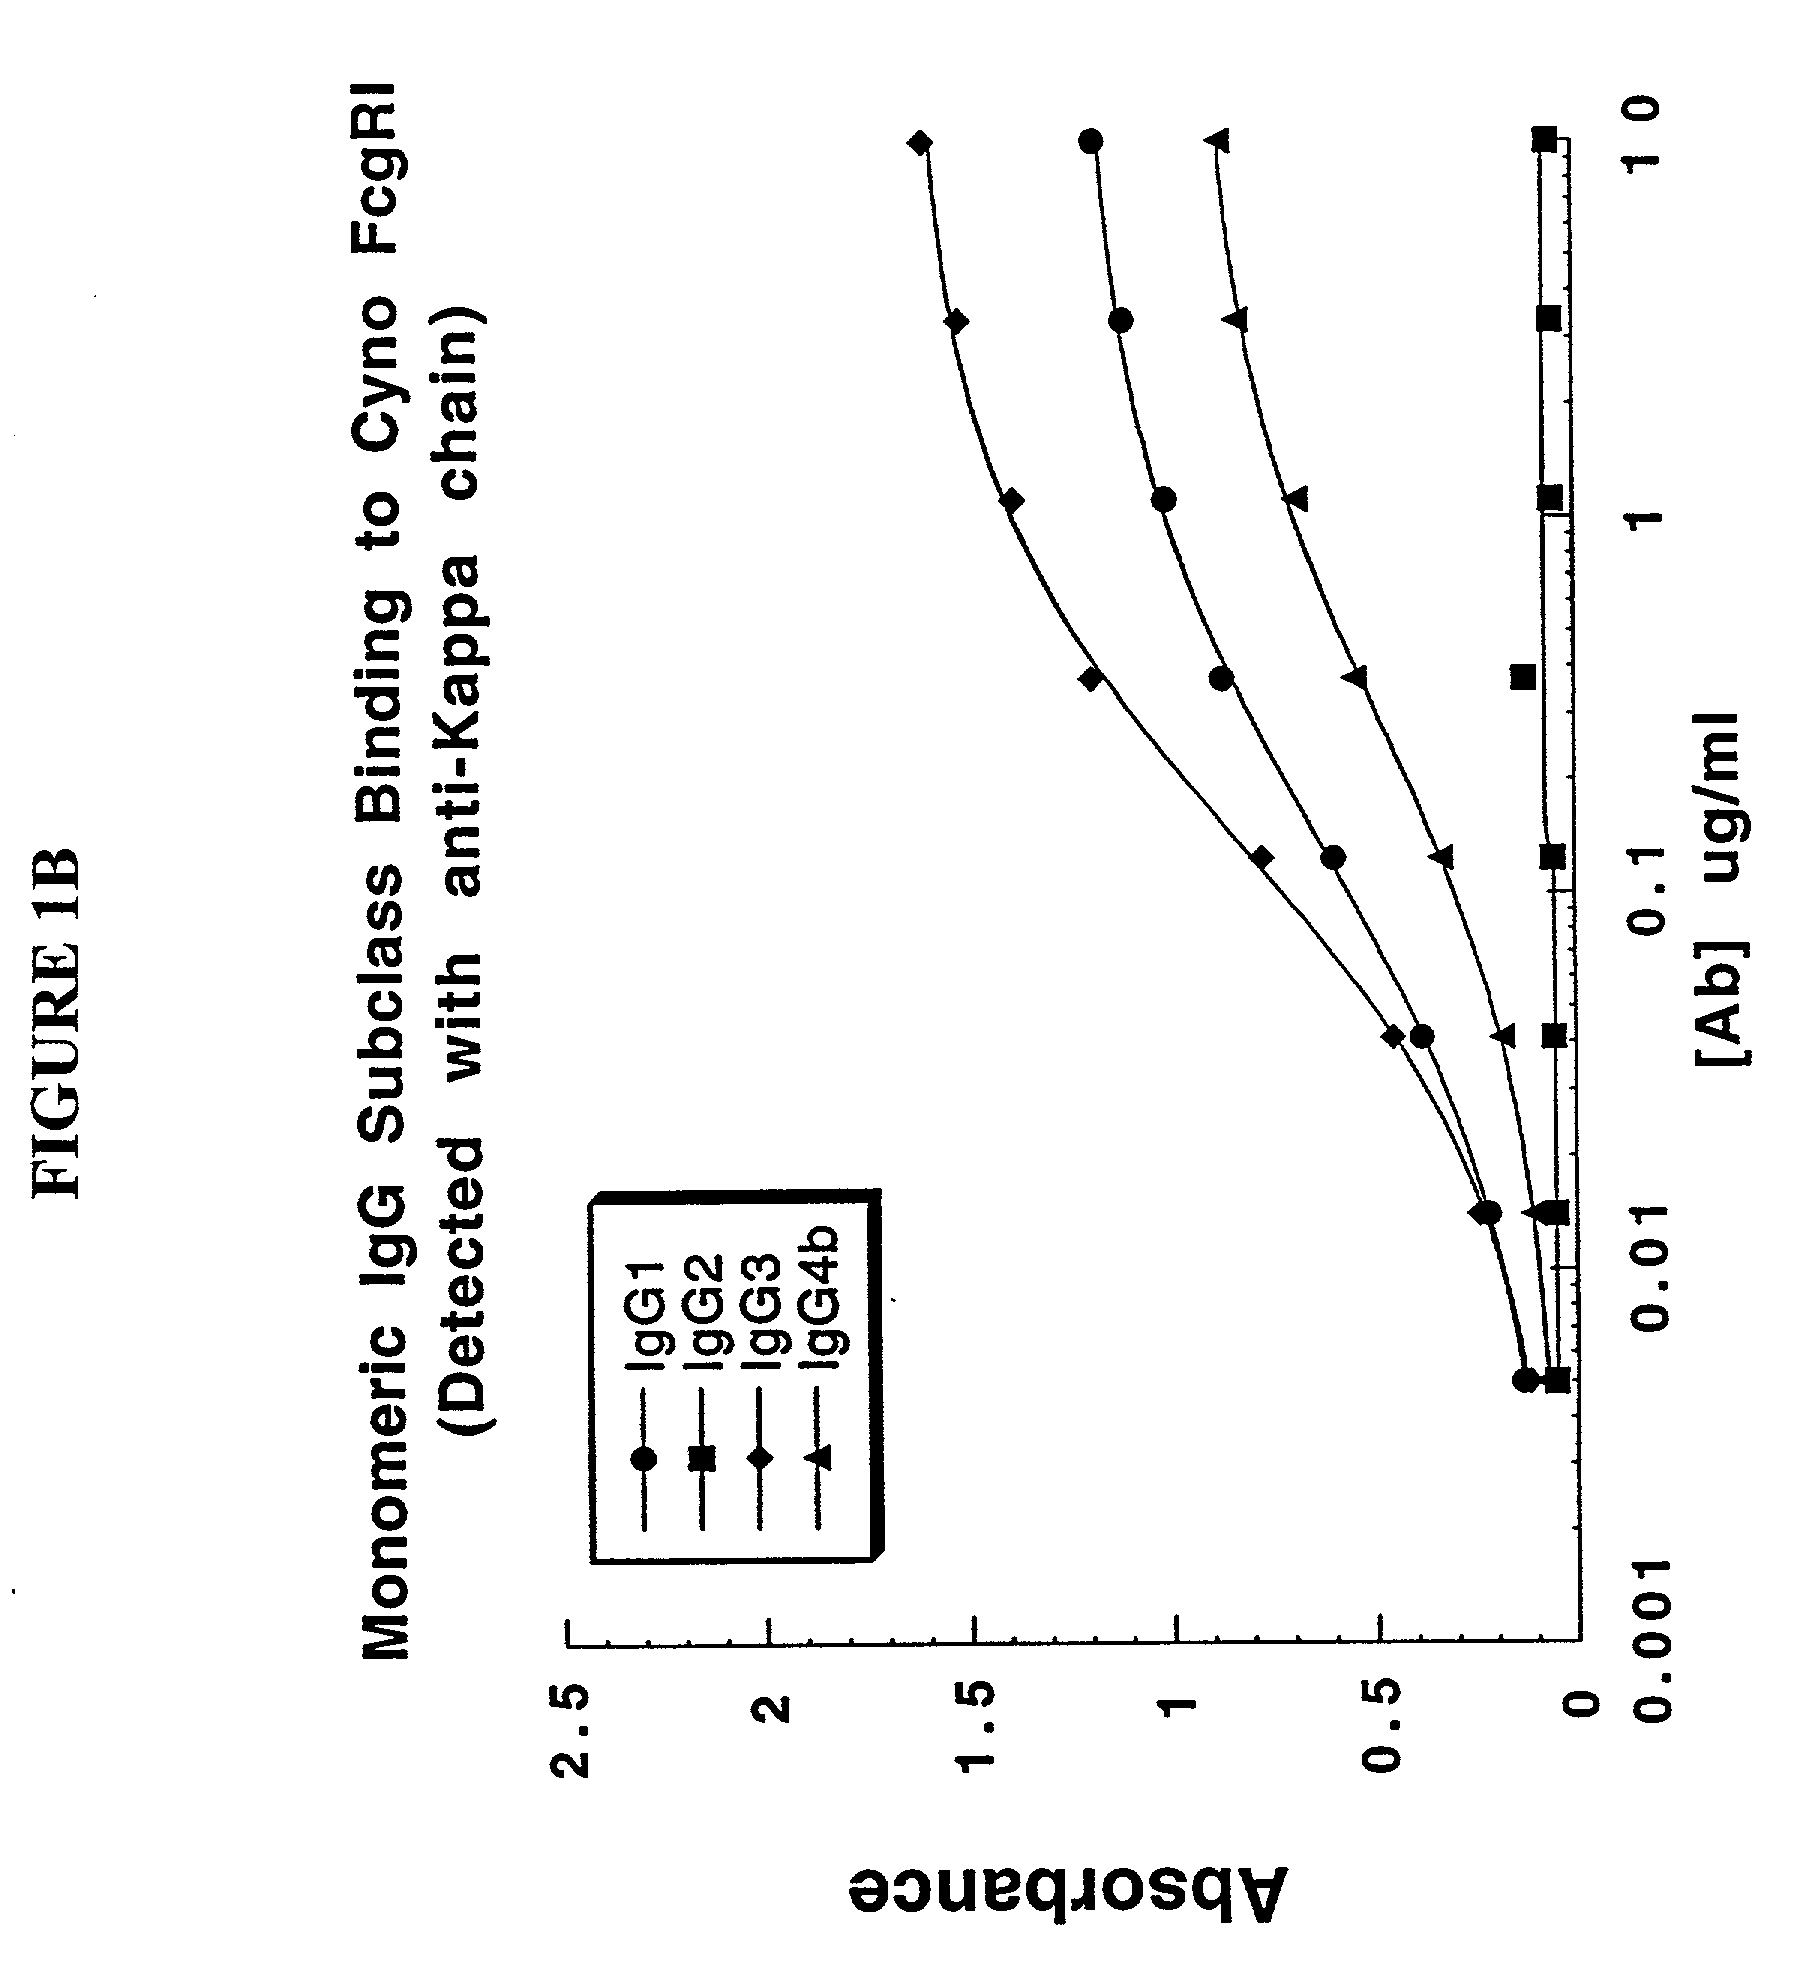 Non-human primate Fc receptors and methods of use